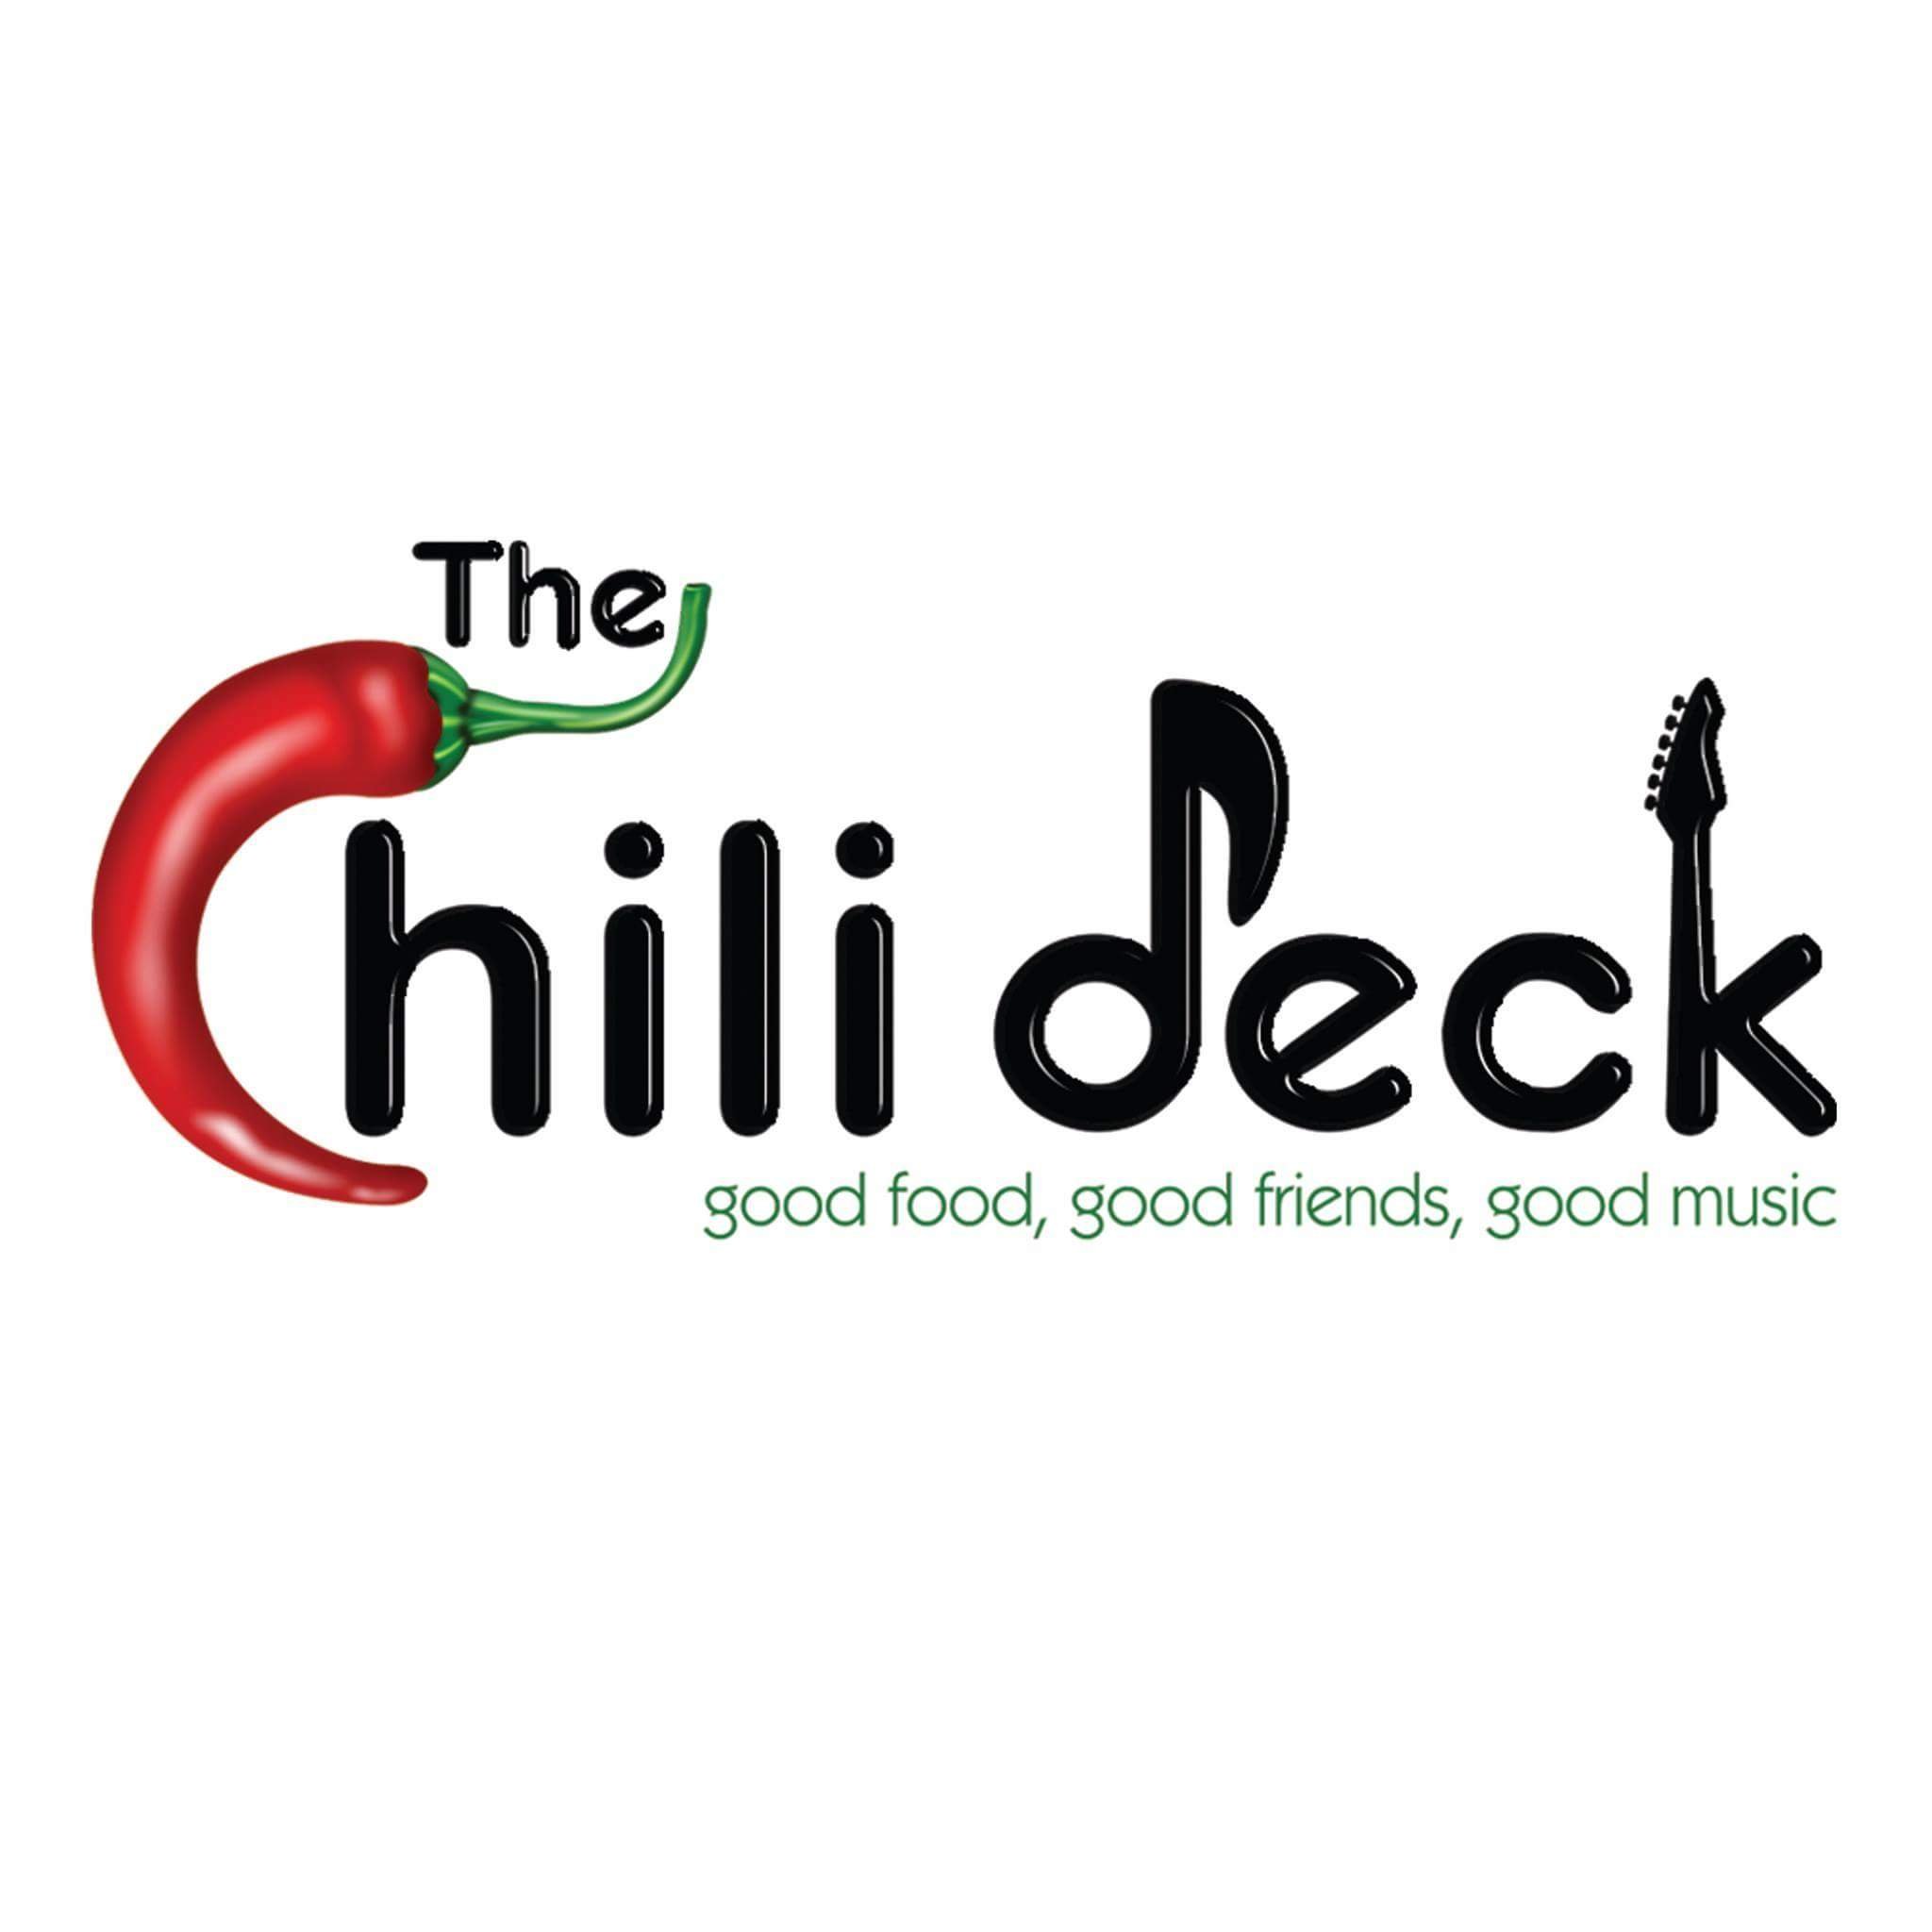 A place to have good food, hang out with good friends, and enjoy good music.  LIVE MUSIC ON SATURDAYS FROM 8:00 PM. IG: chili.deck